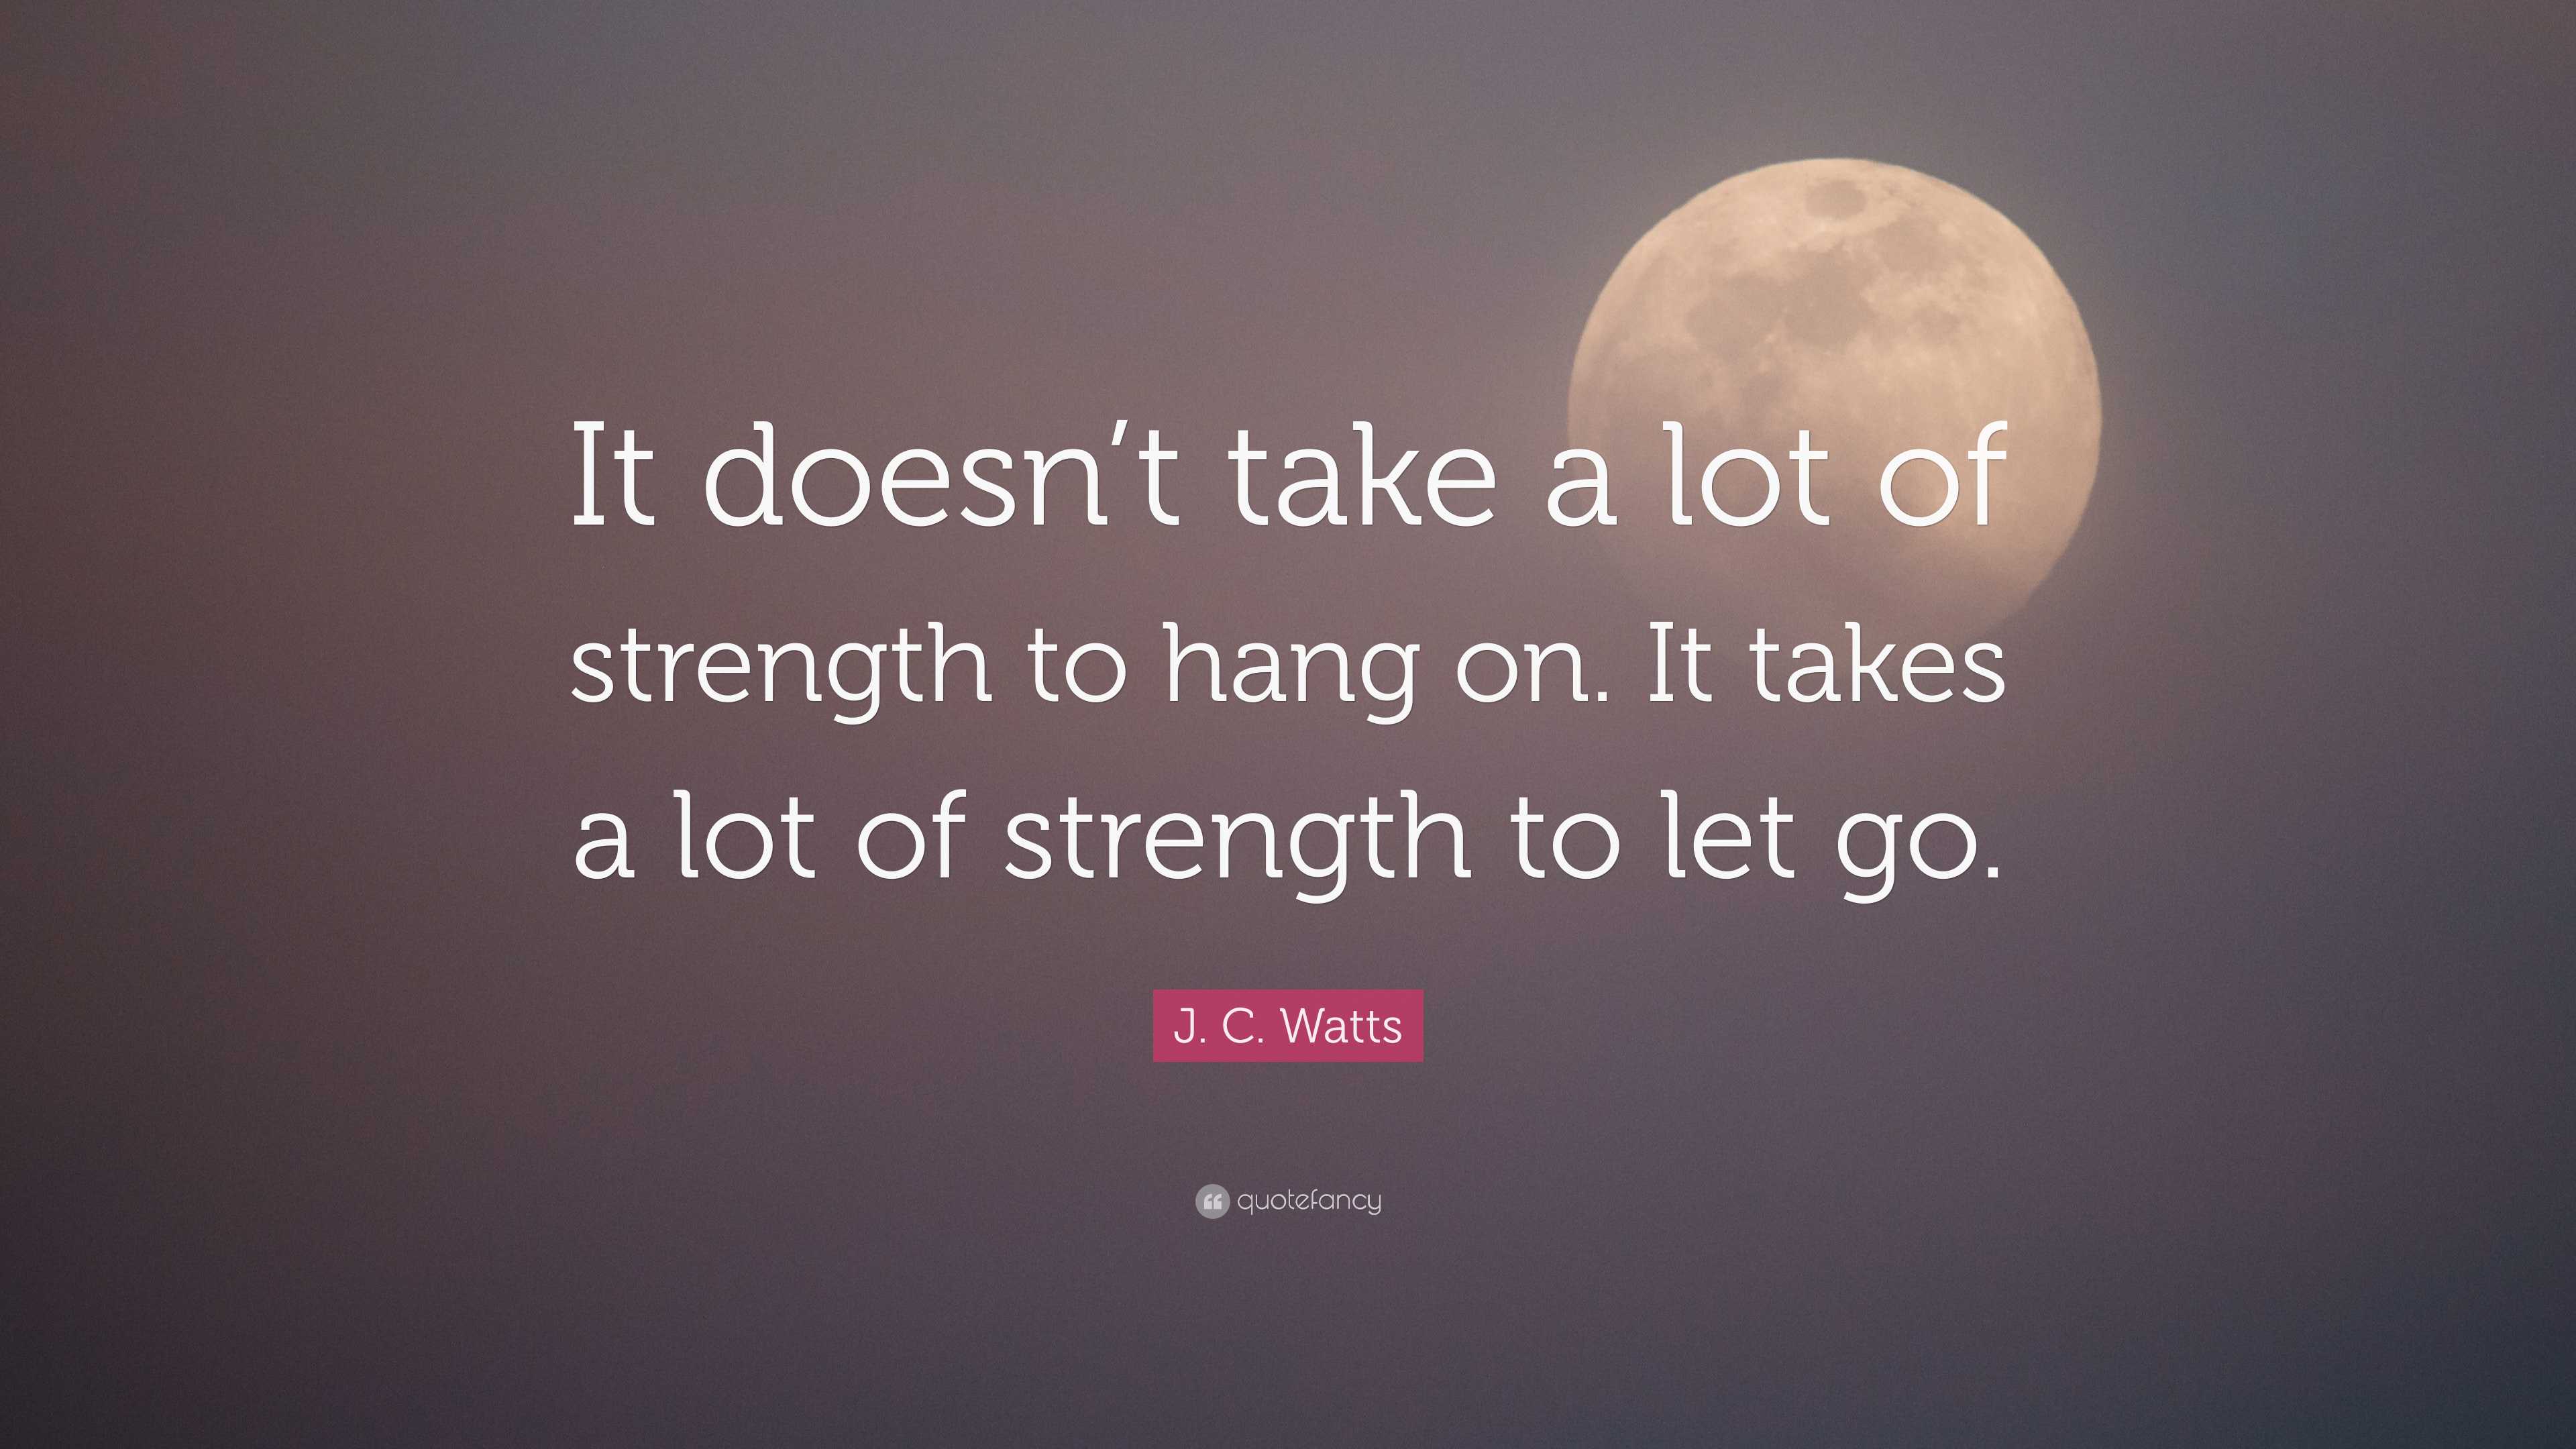 J. C. Watts Quote: “It doesn’t take a lot of strength to hang on. It ...